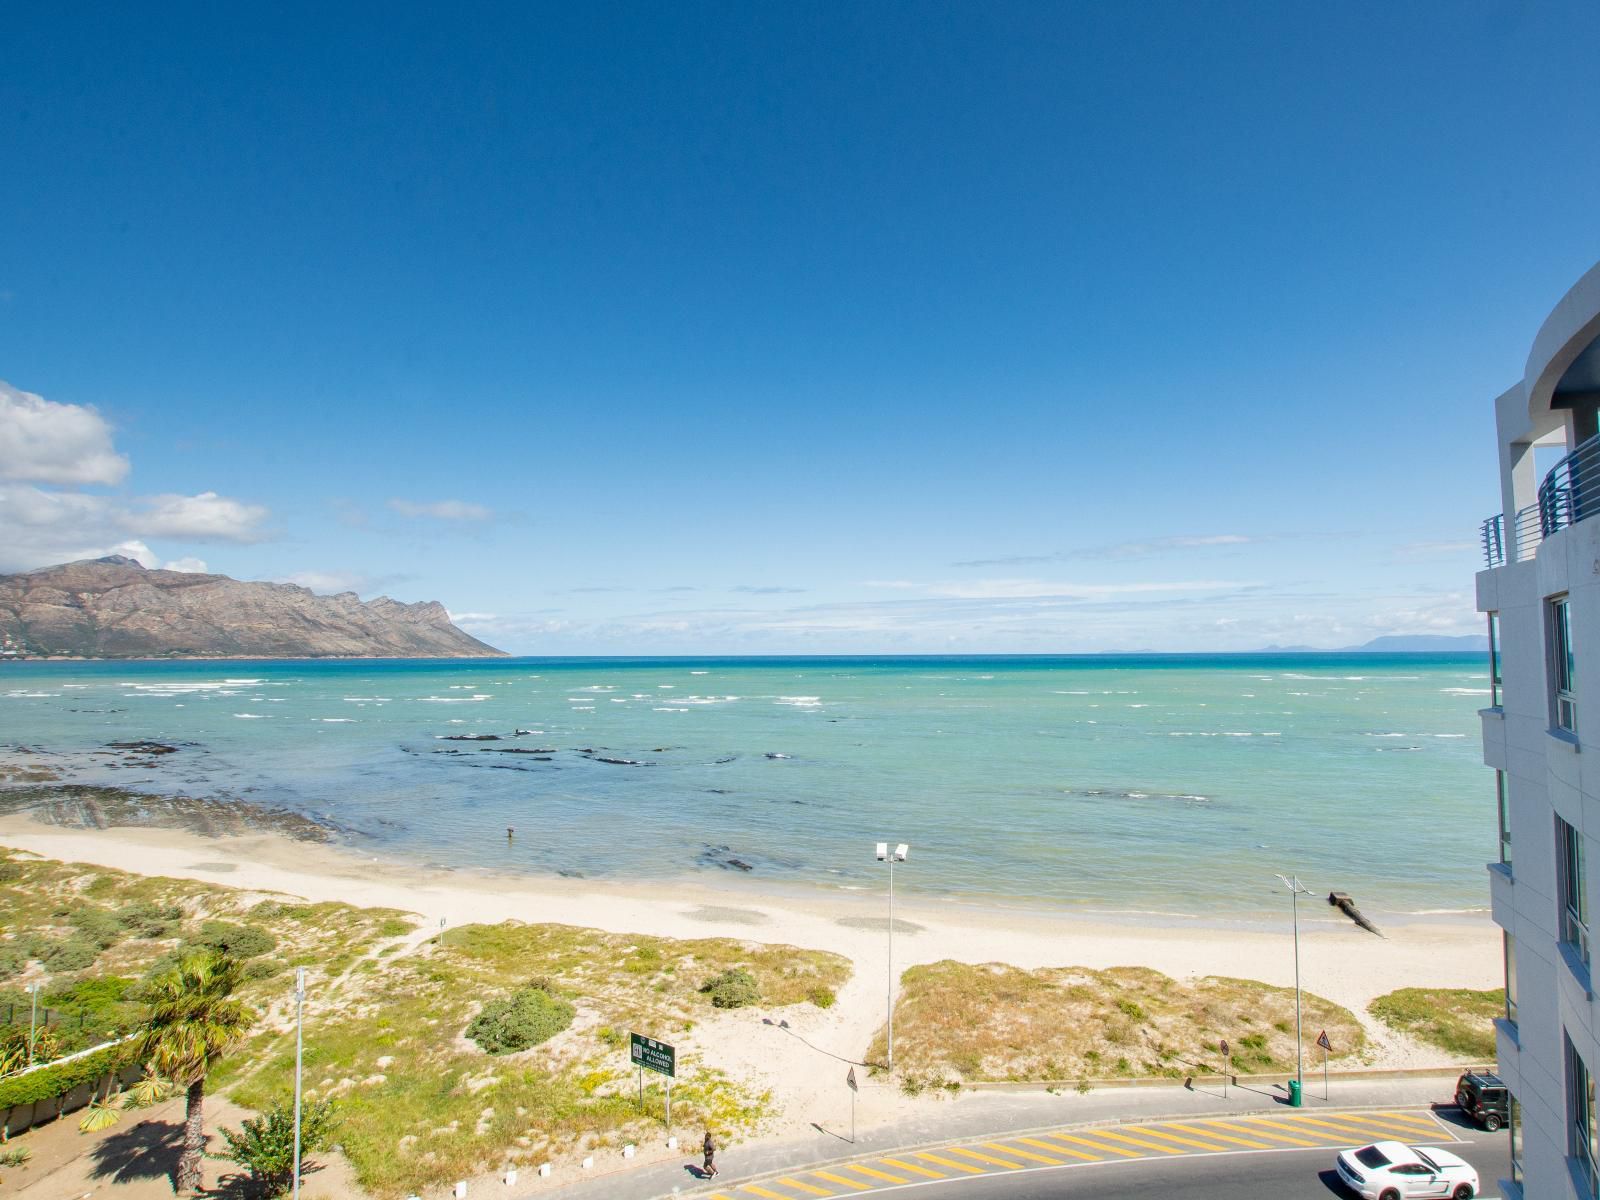 Ocean Breeze Hotel Strand Western Cape South Africa Complementary Colors, Beach, Nature, Sand